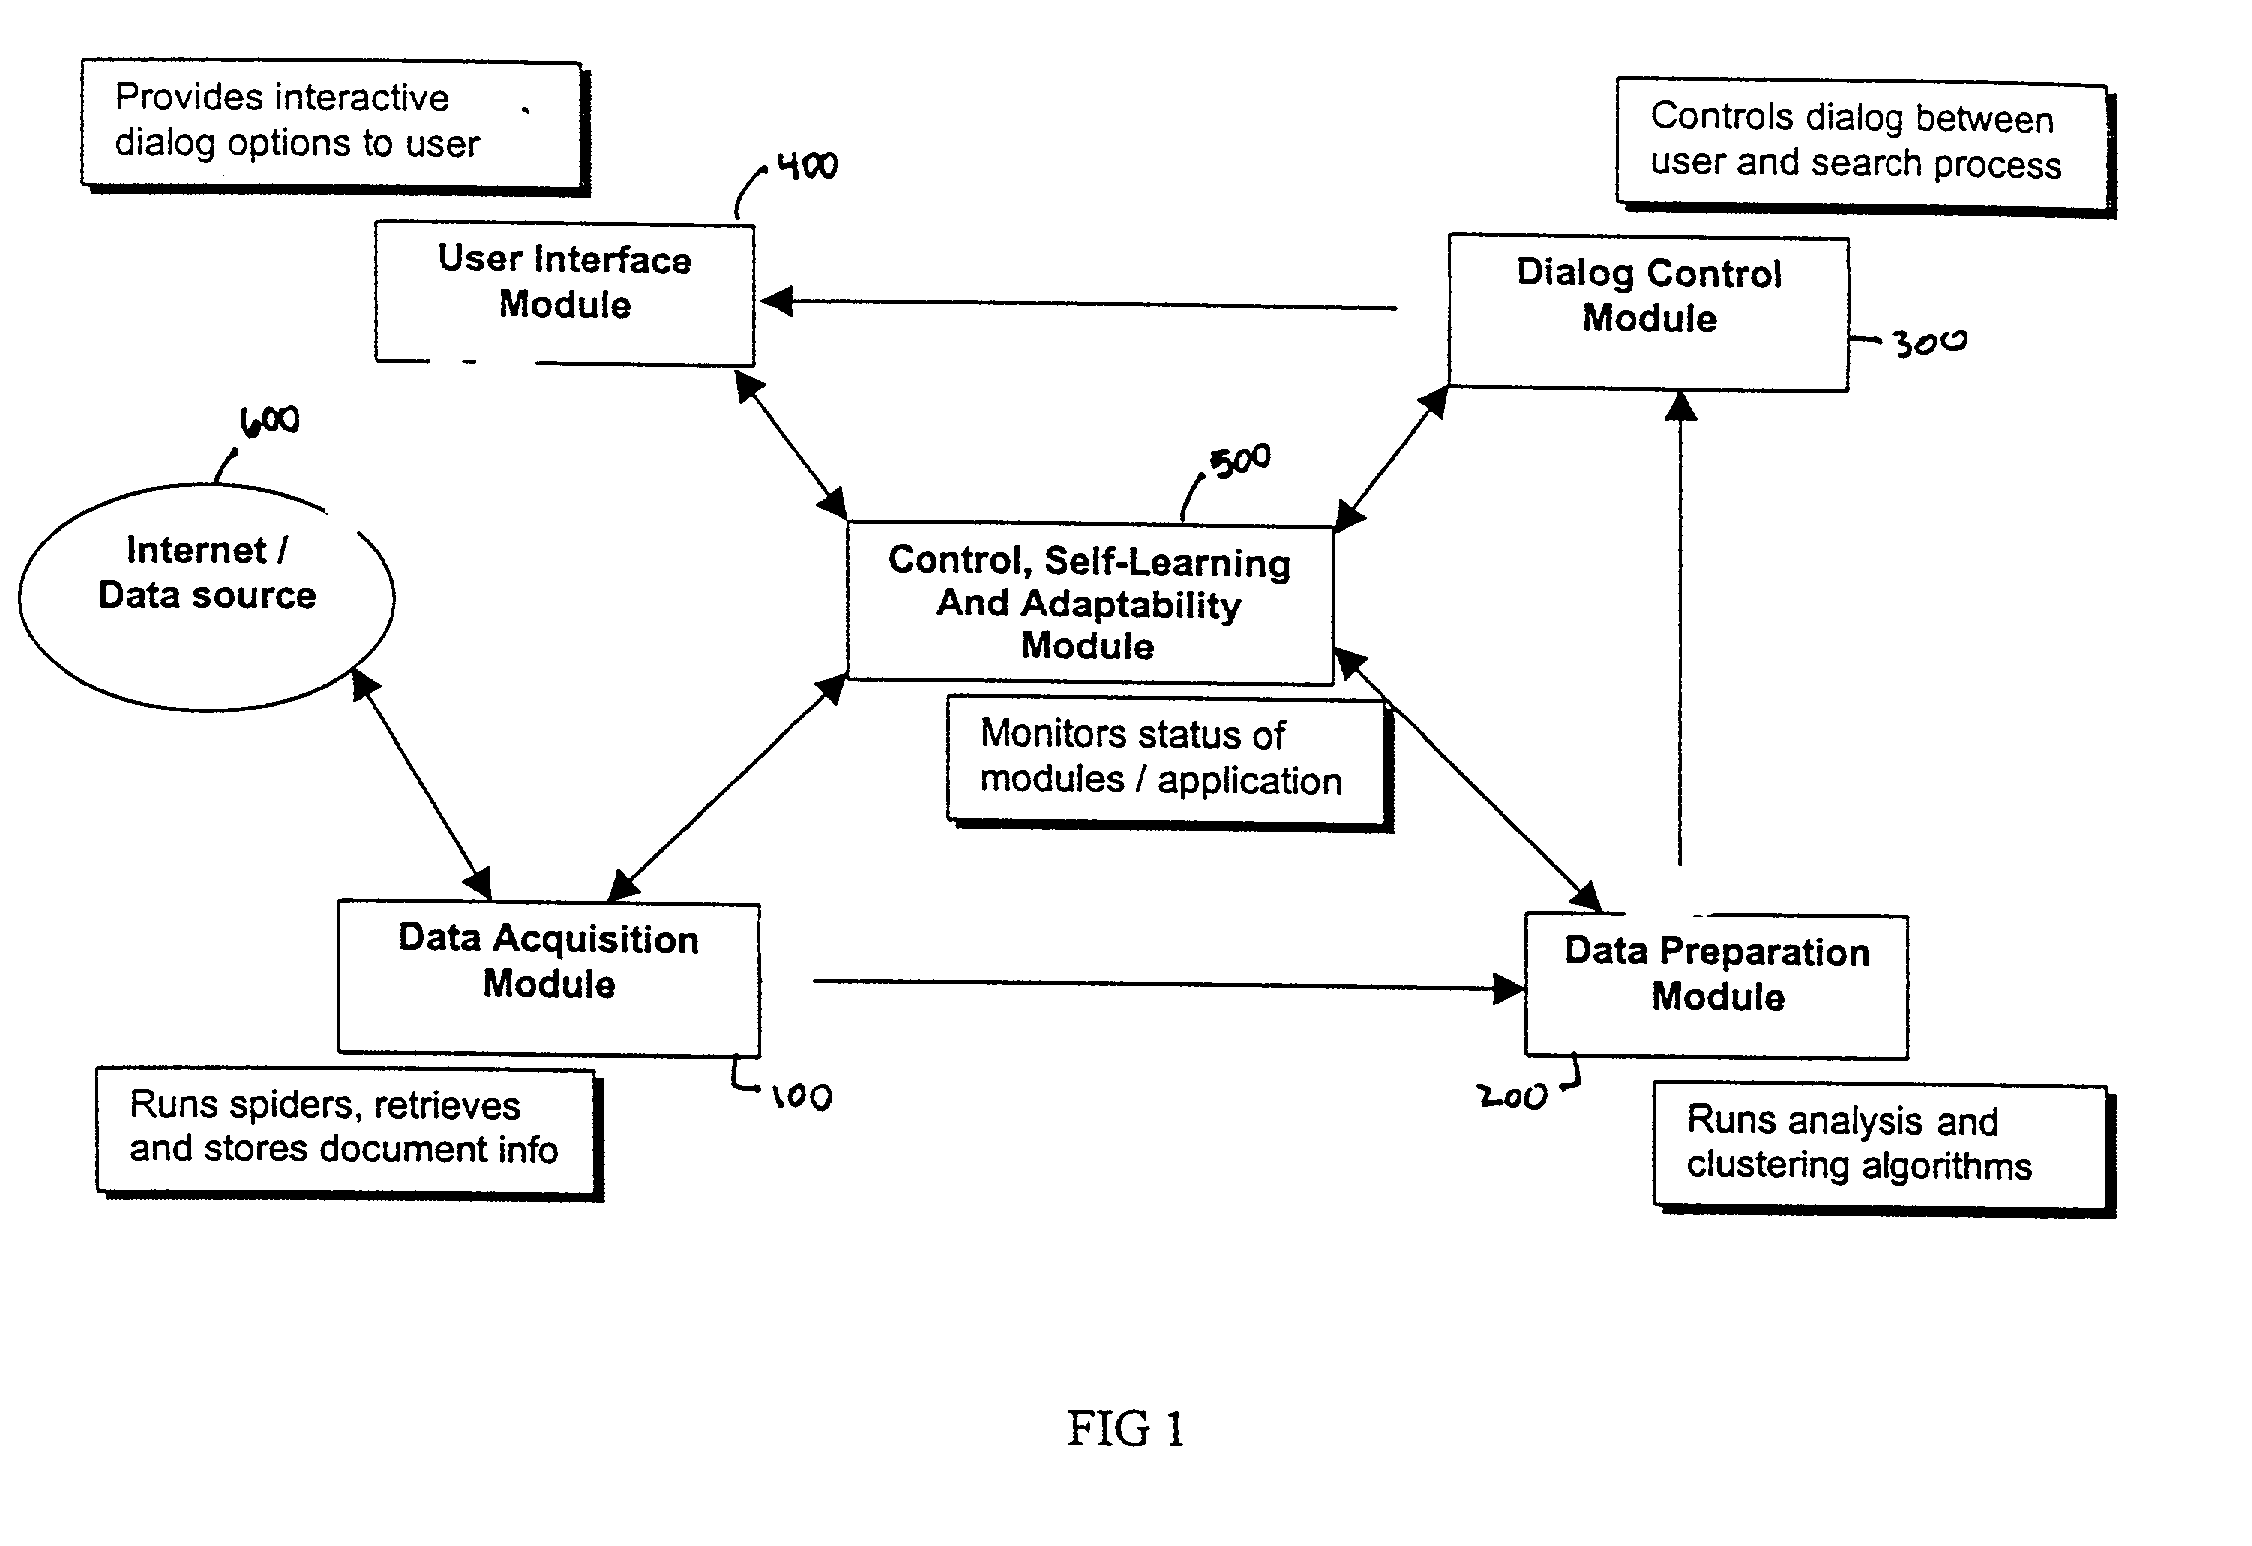 System and method for analysis and clustering of documents for search engine